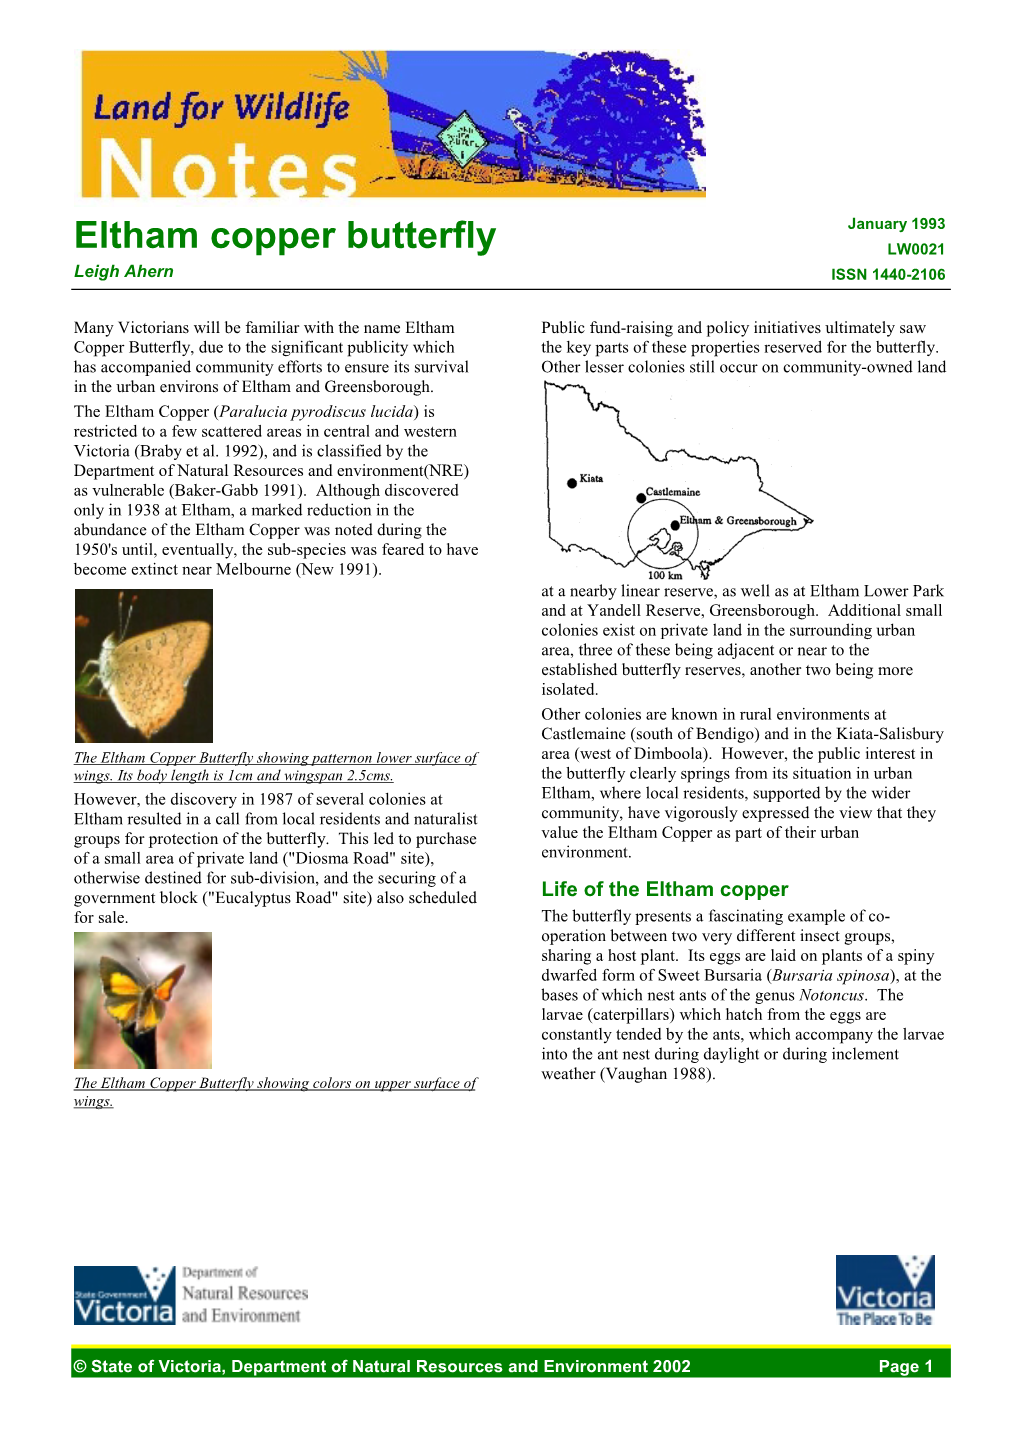 Eltham Copper Butterfly (VIC)